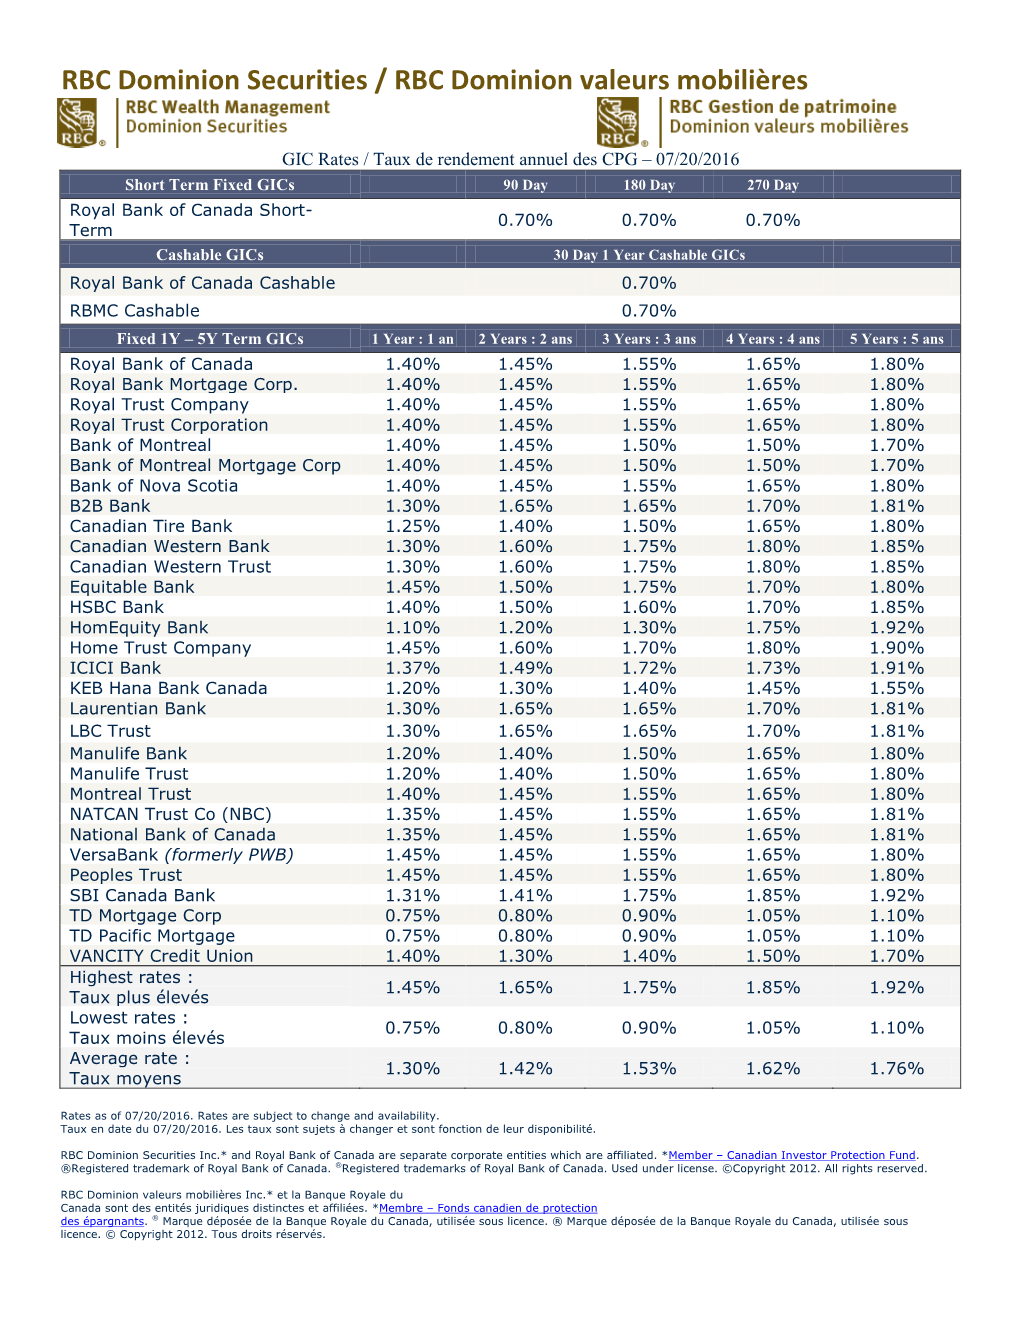 RBC Investments GIC Annual Pay Rates